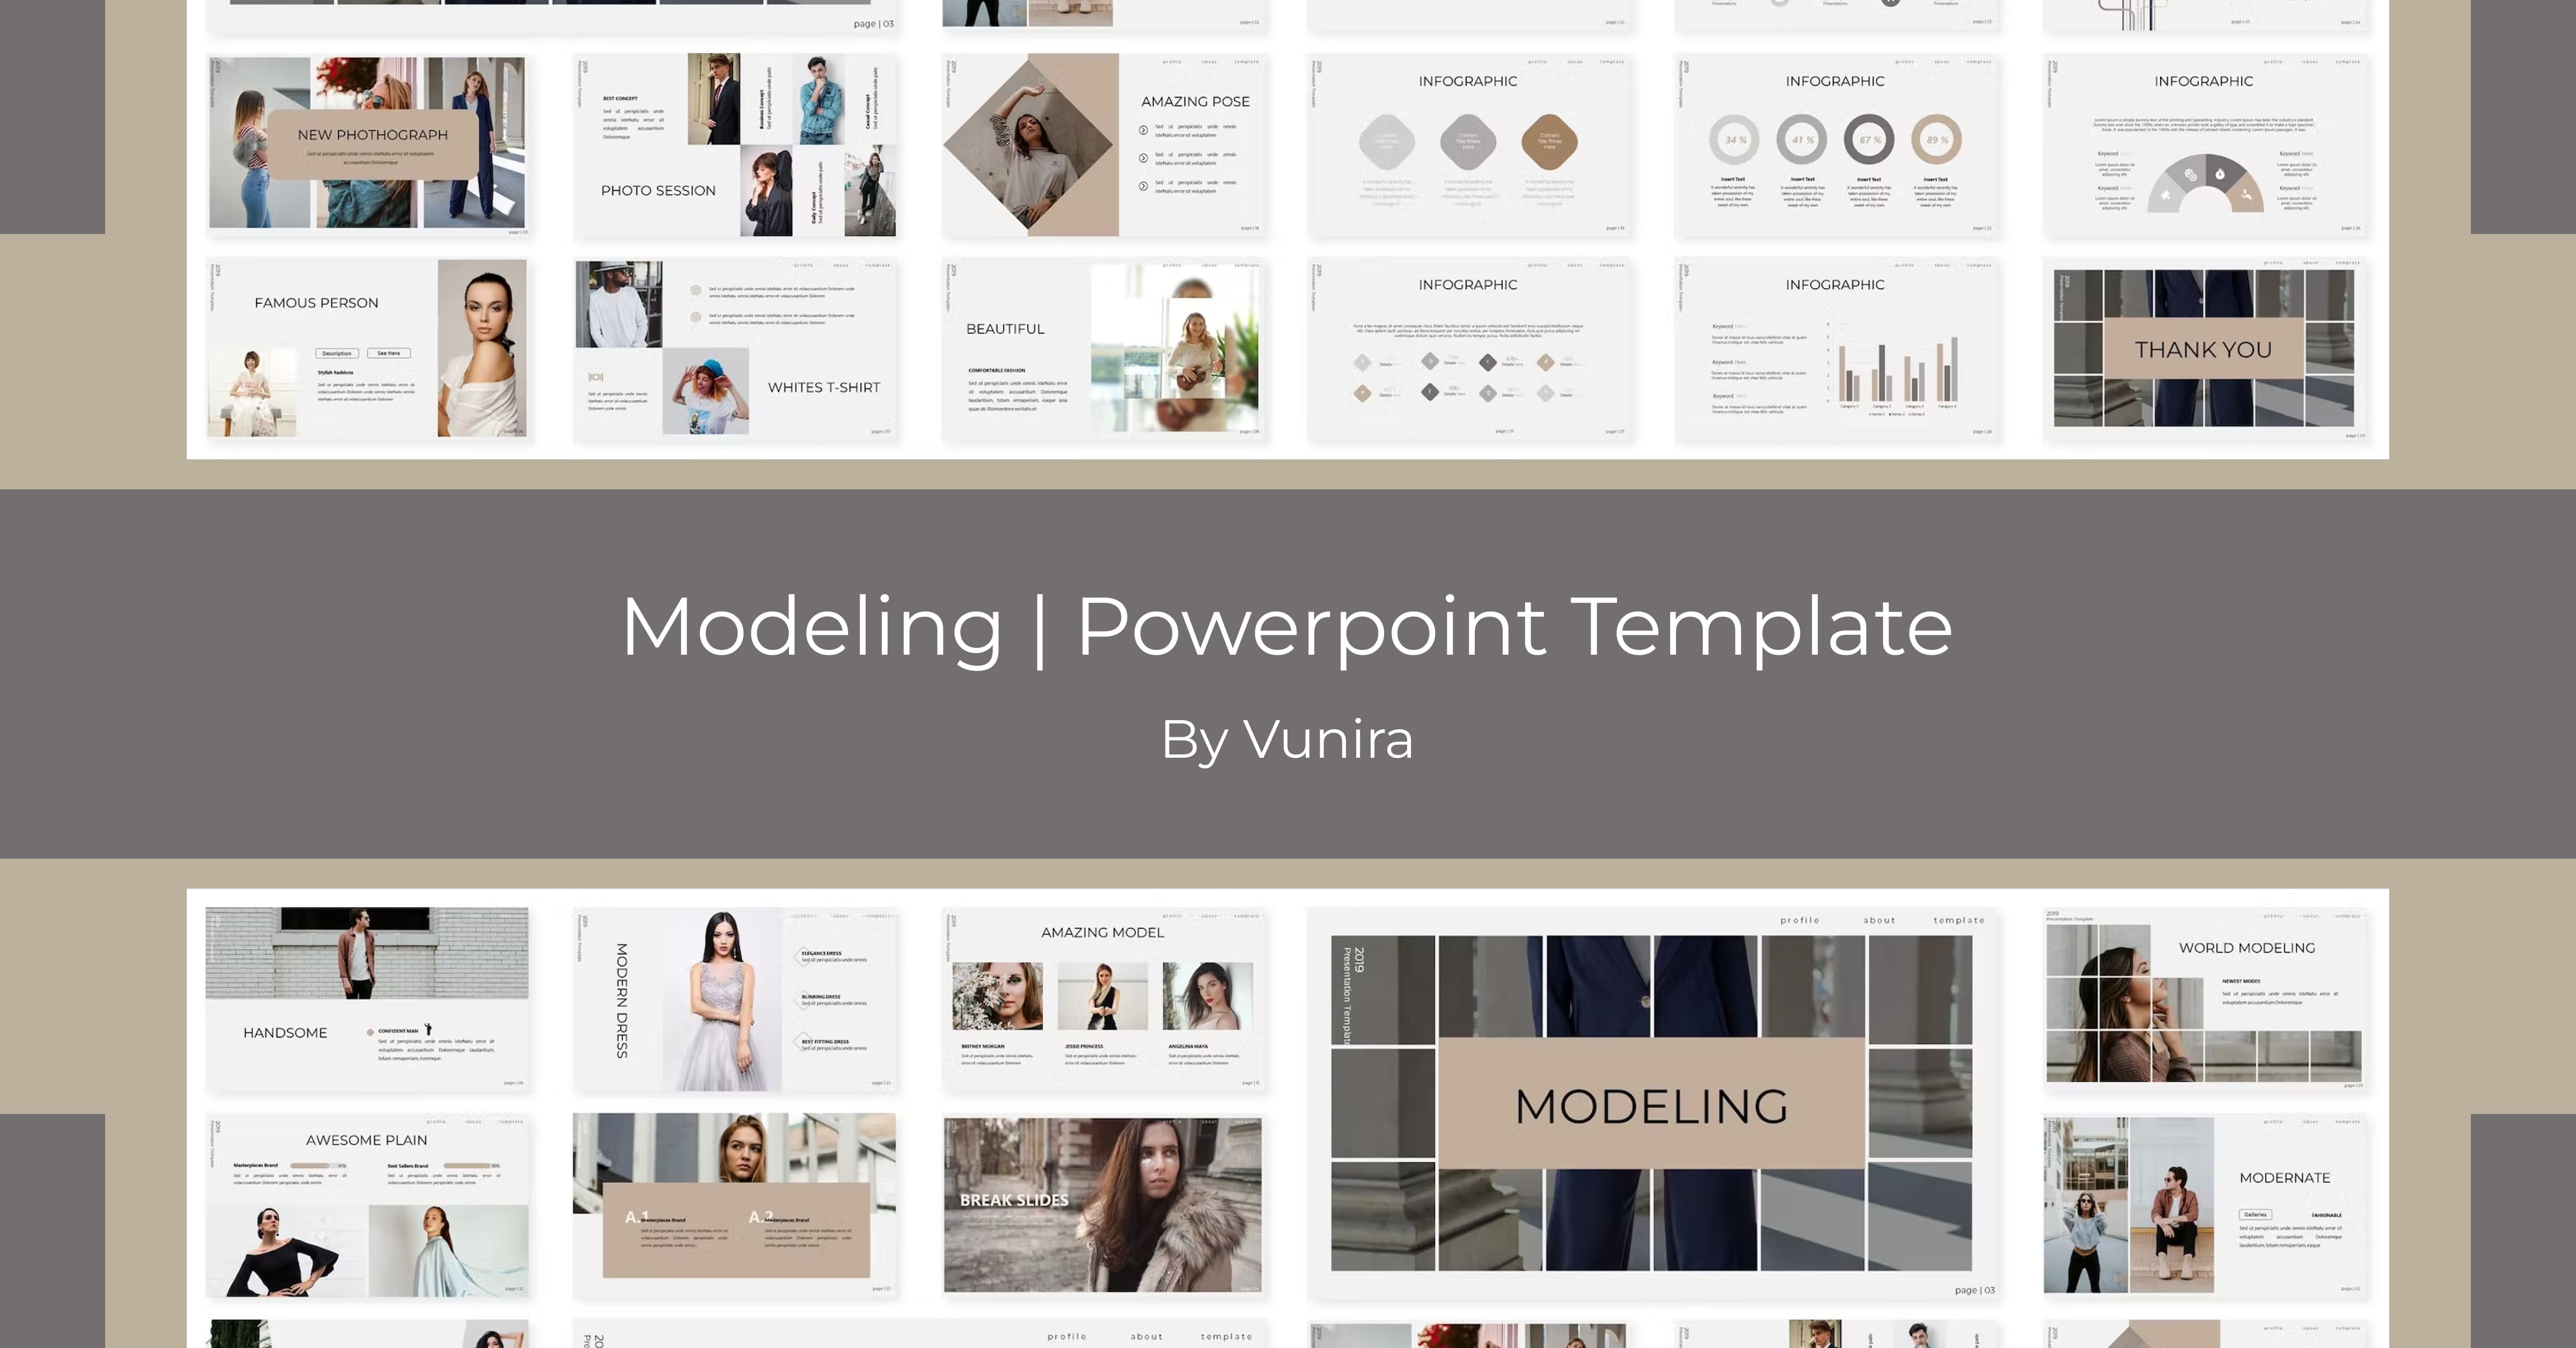 Modeling | Powerpoint Template - Facebook.